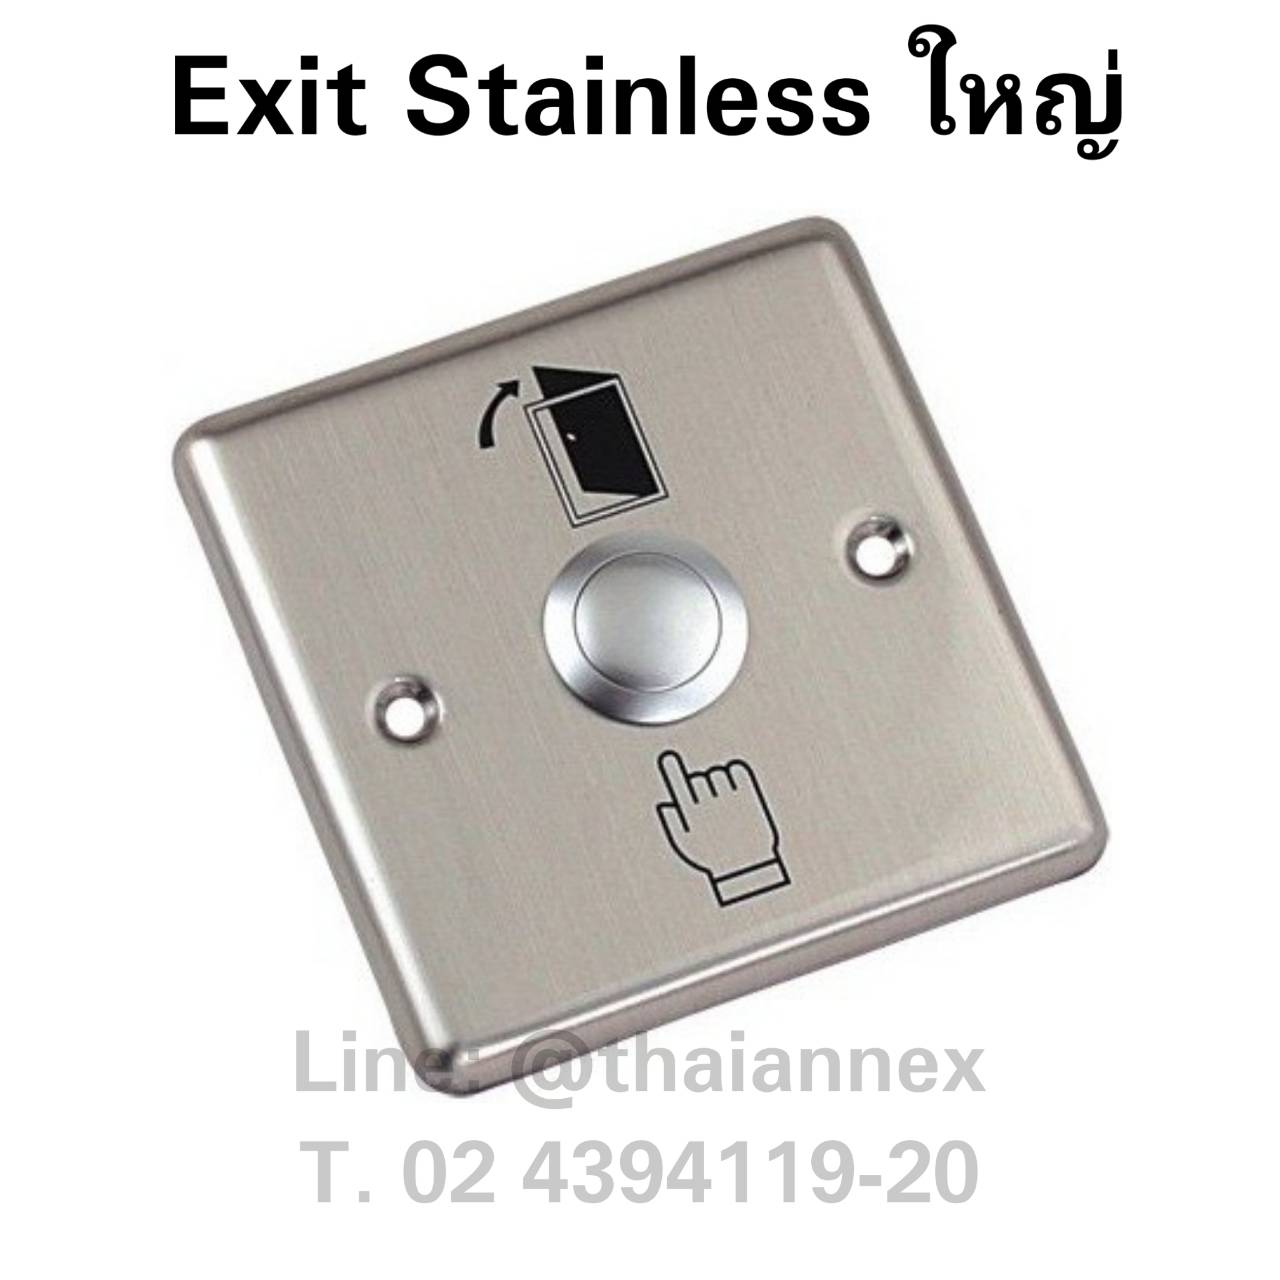 Stainless Exit Switch 9x9